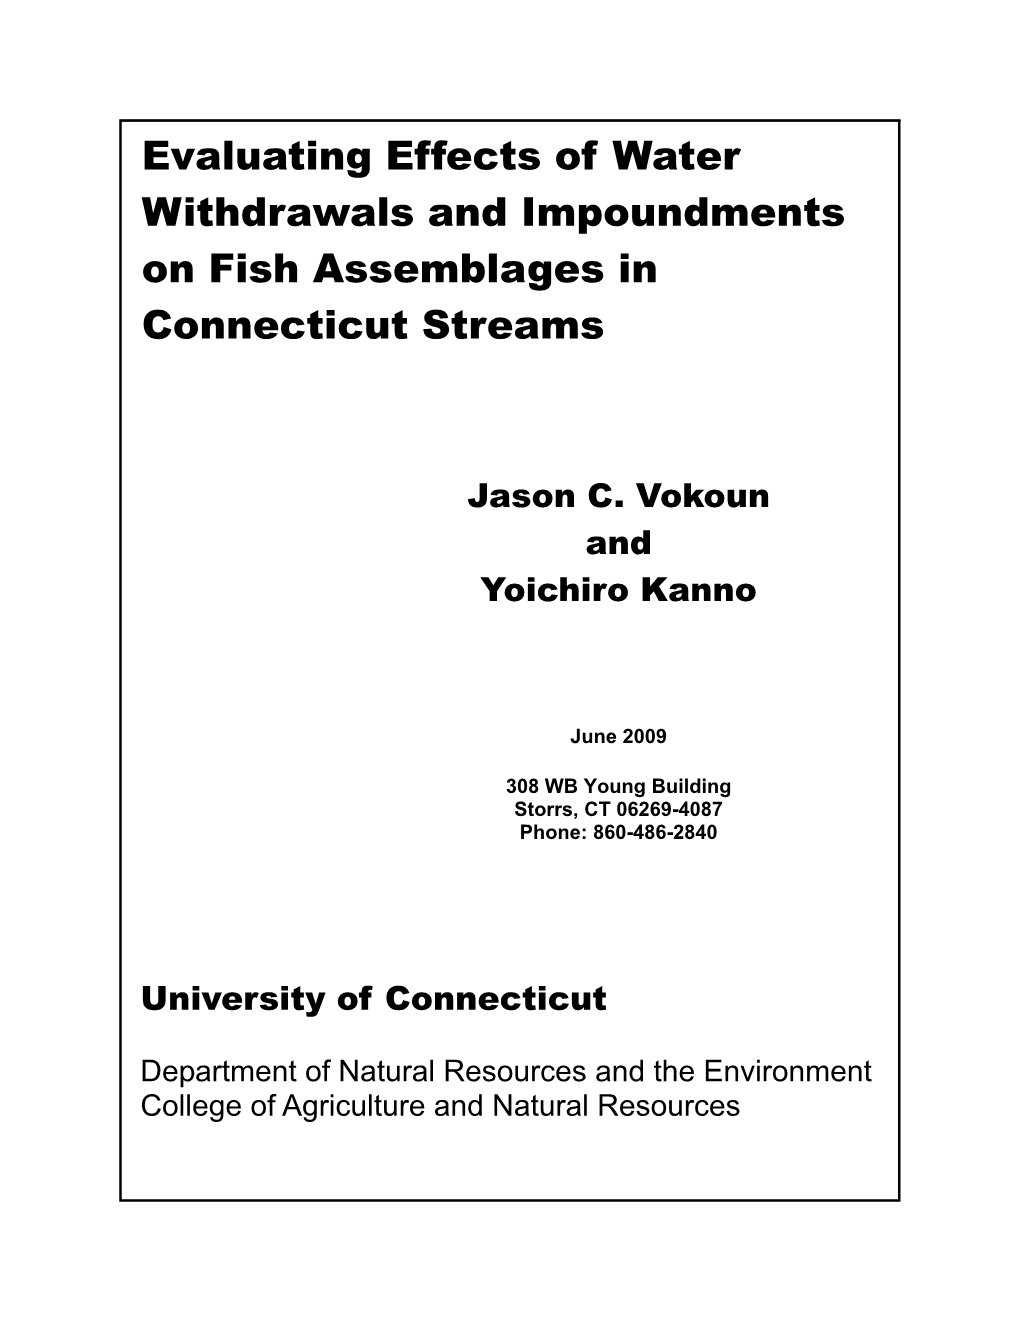 Evaluating Effects of Water Withdrawals and Impoundments on Fish Assemblages in Connecticut Streams